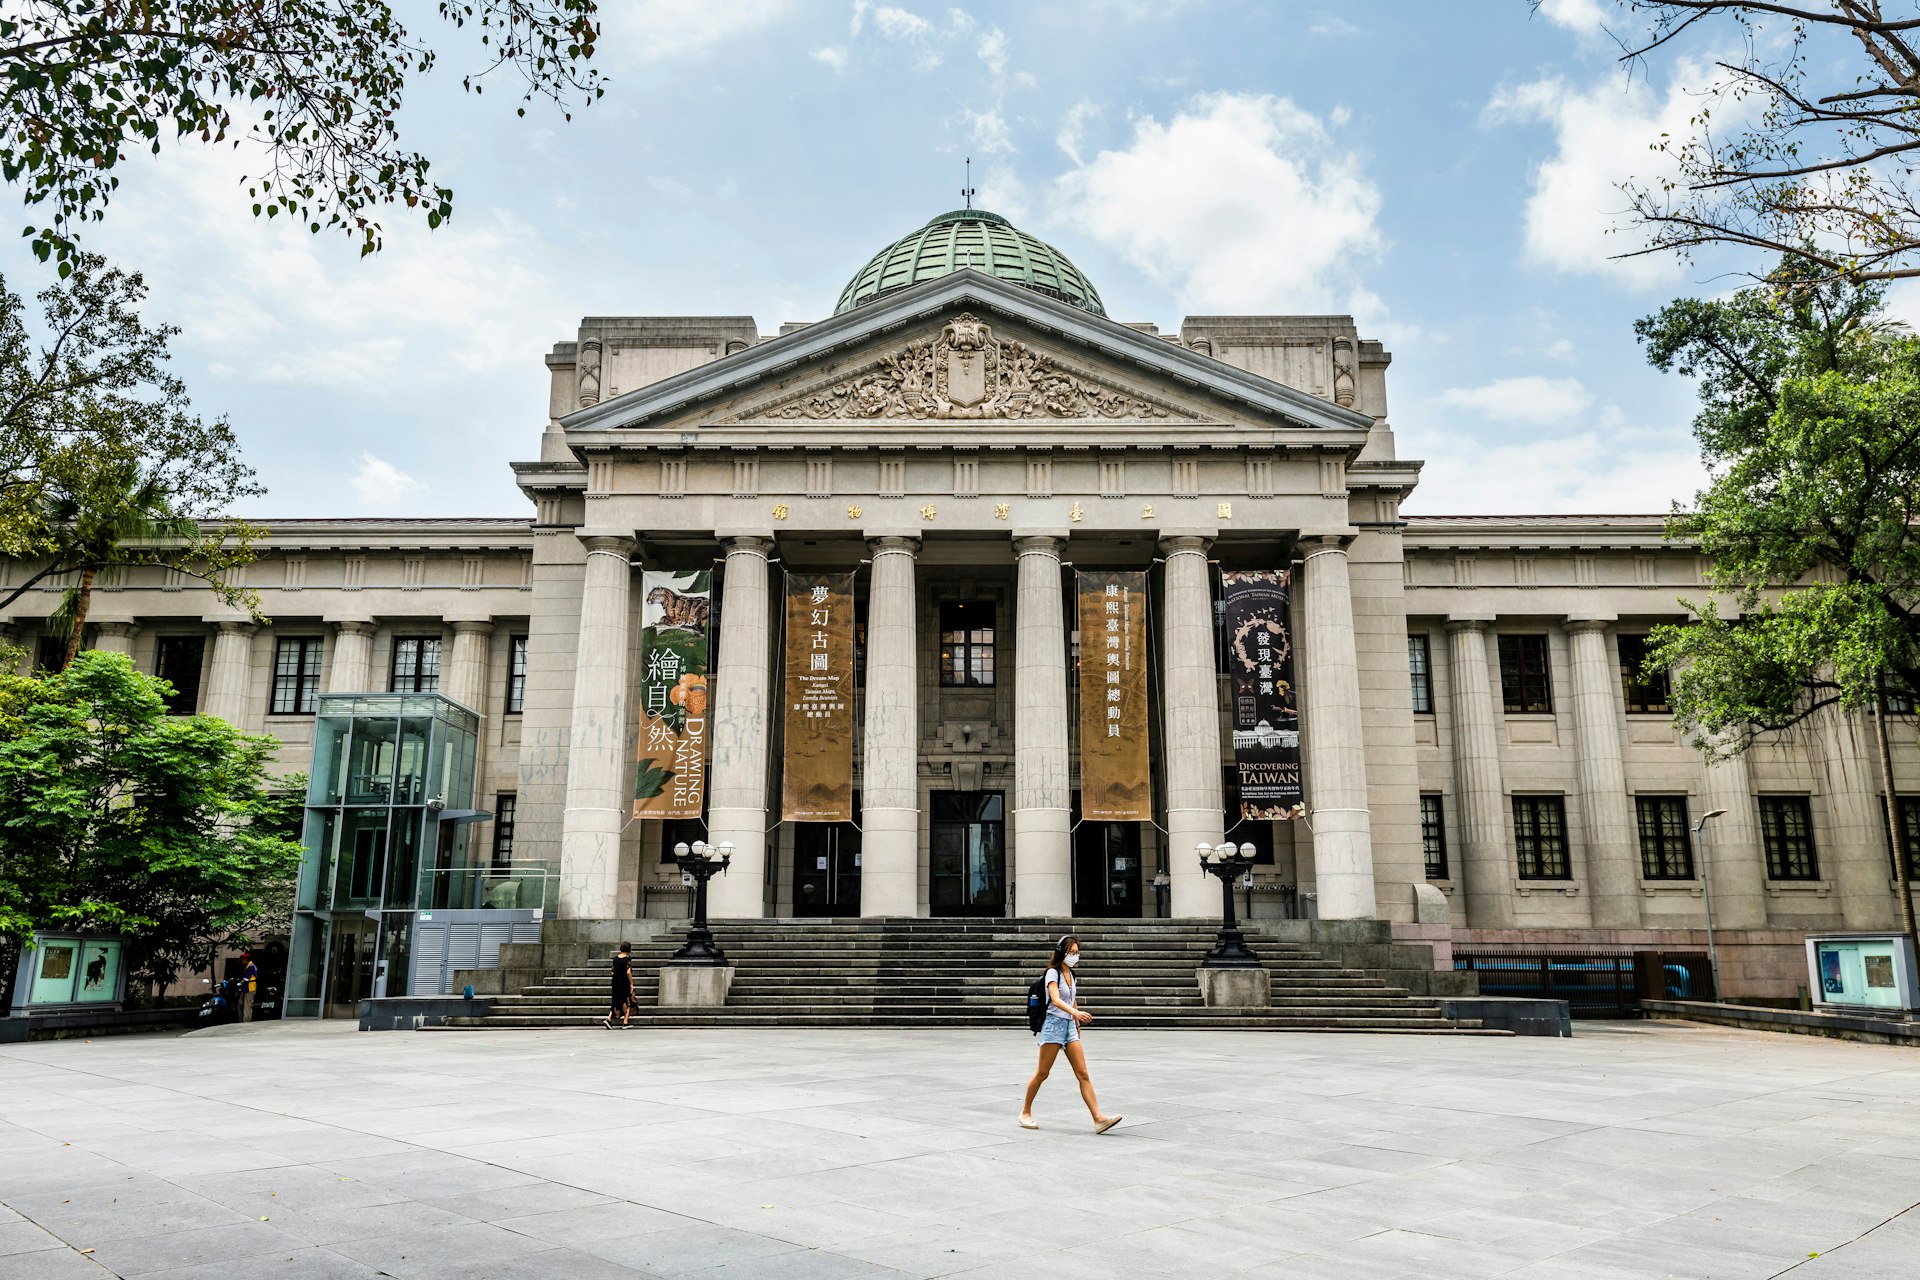 The neoclassical columns, steps, pediment and dome of the National Taiwan Museum, Taipei, Taiwan